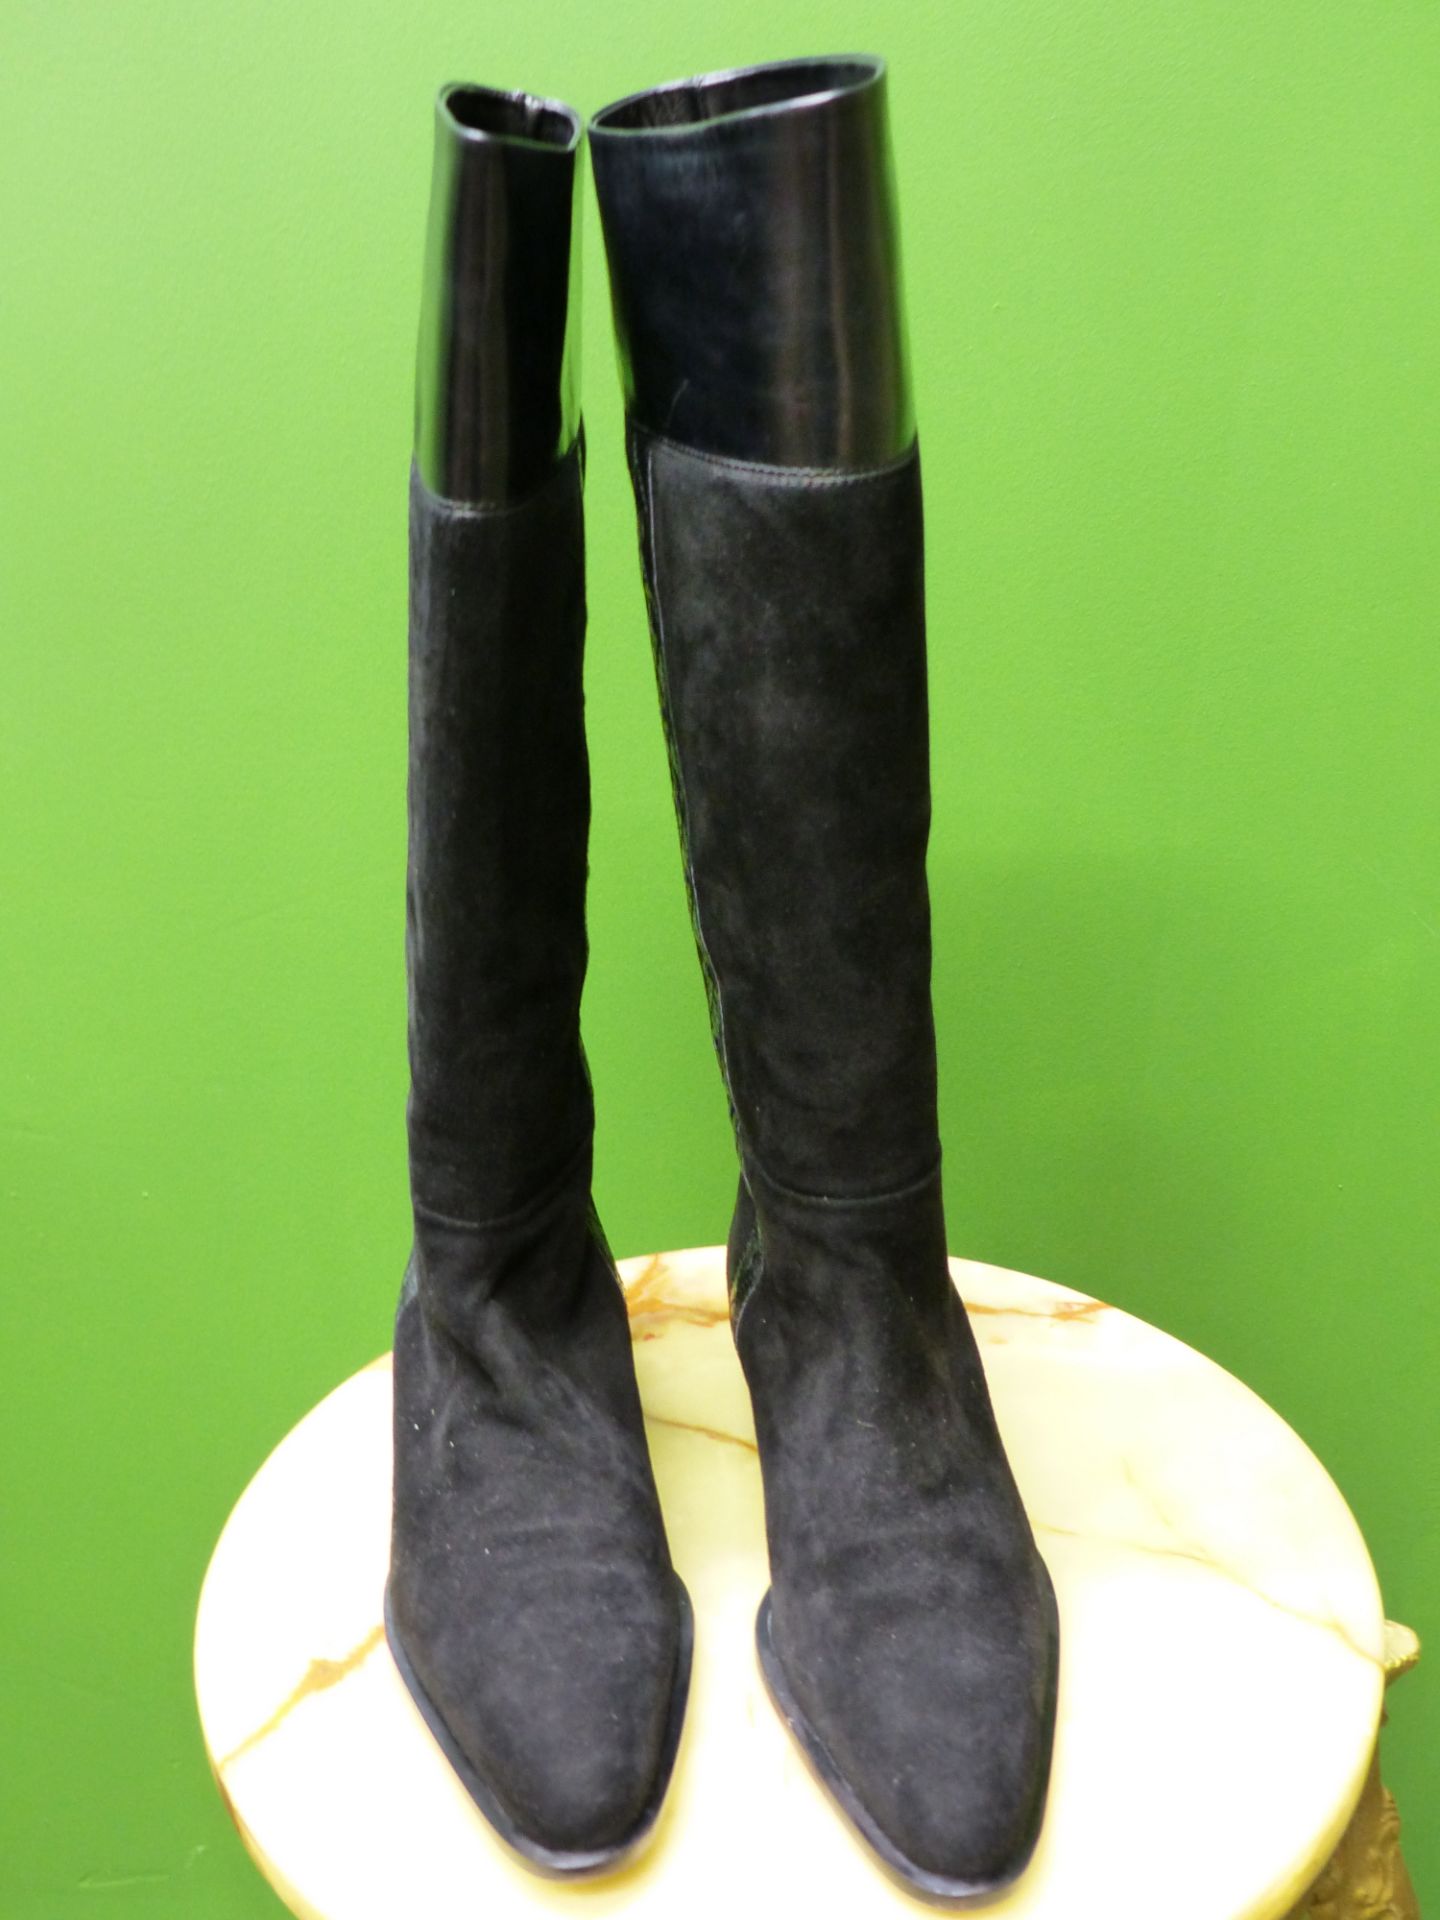 BOOTS. LORENZO BANFI MILANO. KNEE HIGH SUEDE AND LEATHER BLACK BOOTS. SIZE EUR 39.5. - Image 3 of 6